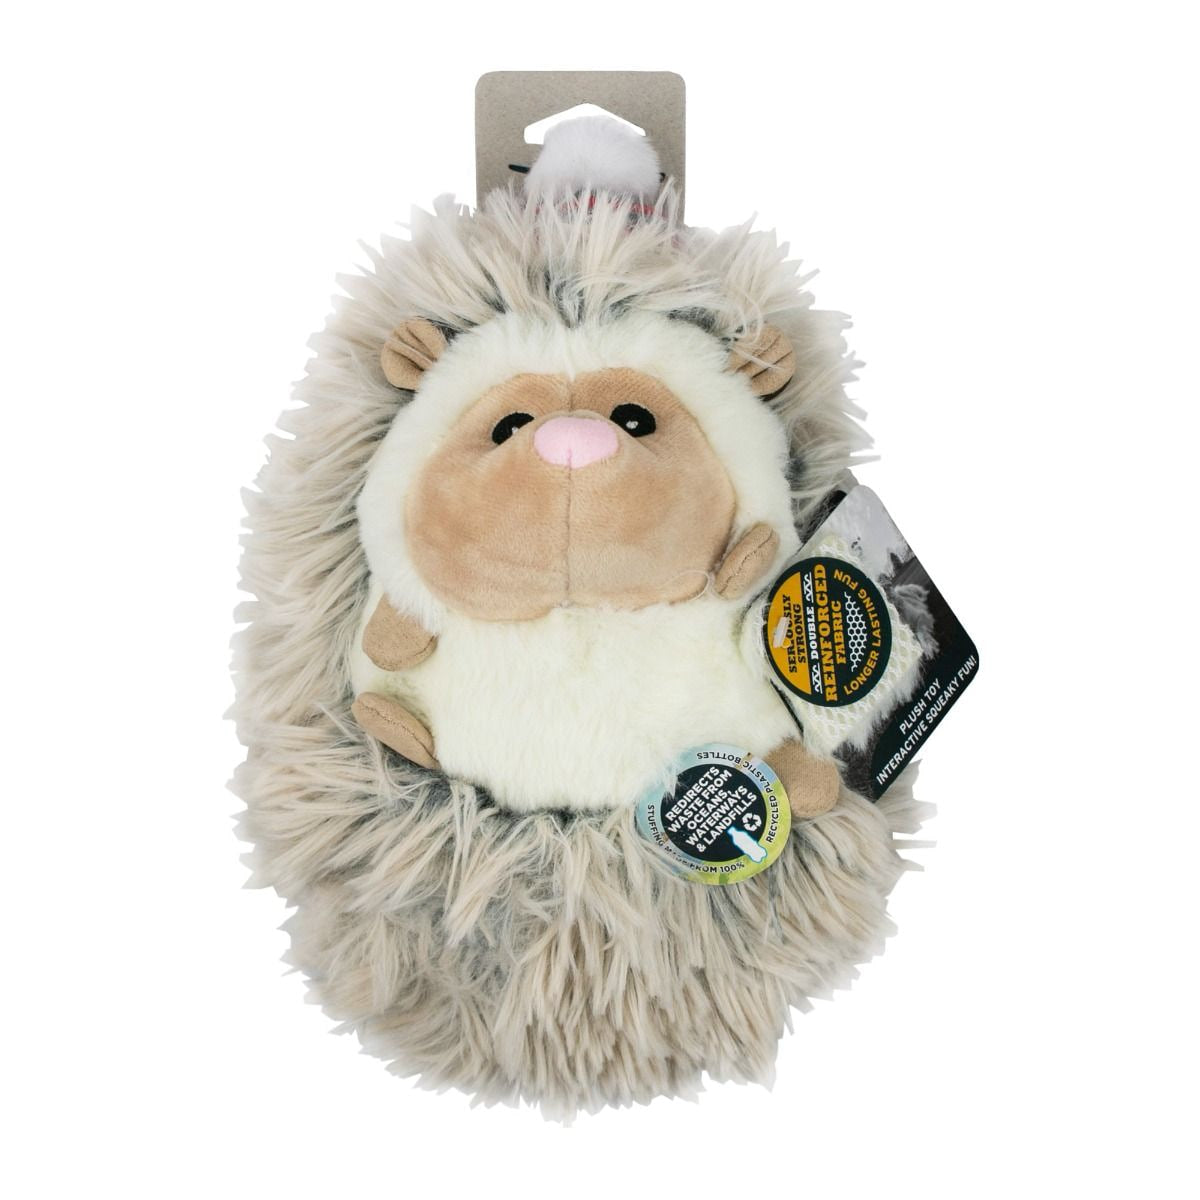 Squeaky Plush Dog Toy: Real Feel Fluffy Holiday Hedgehog